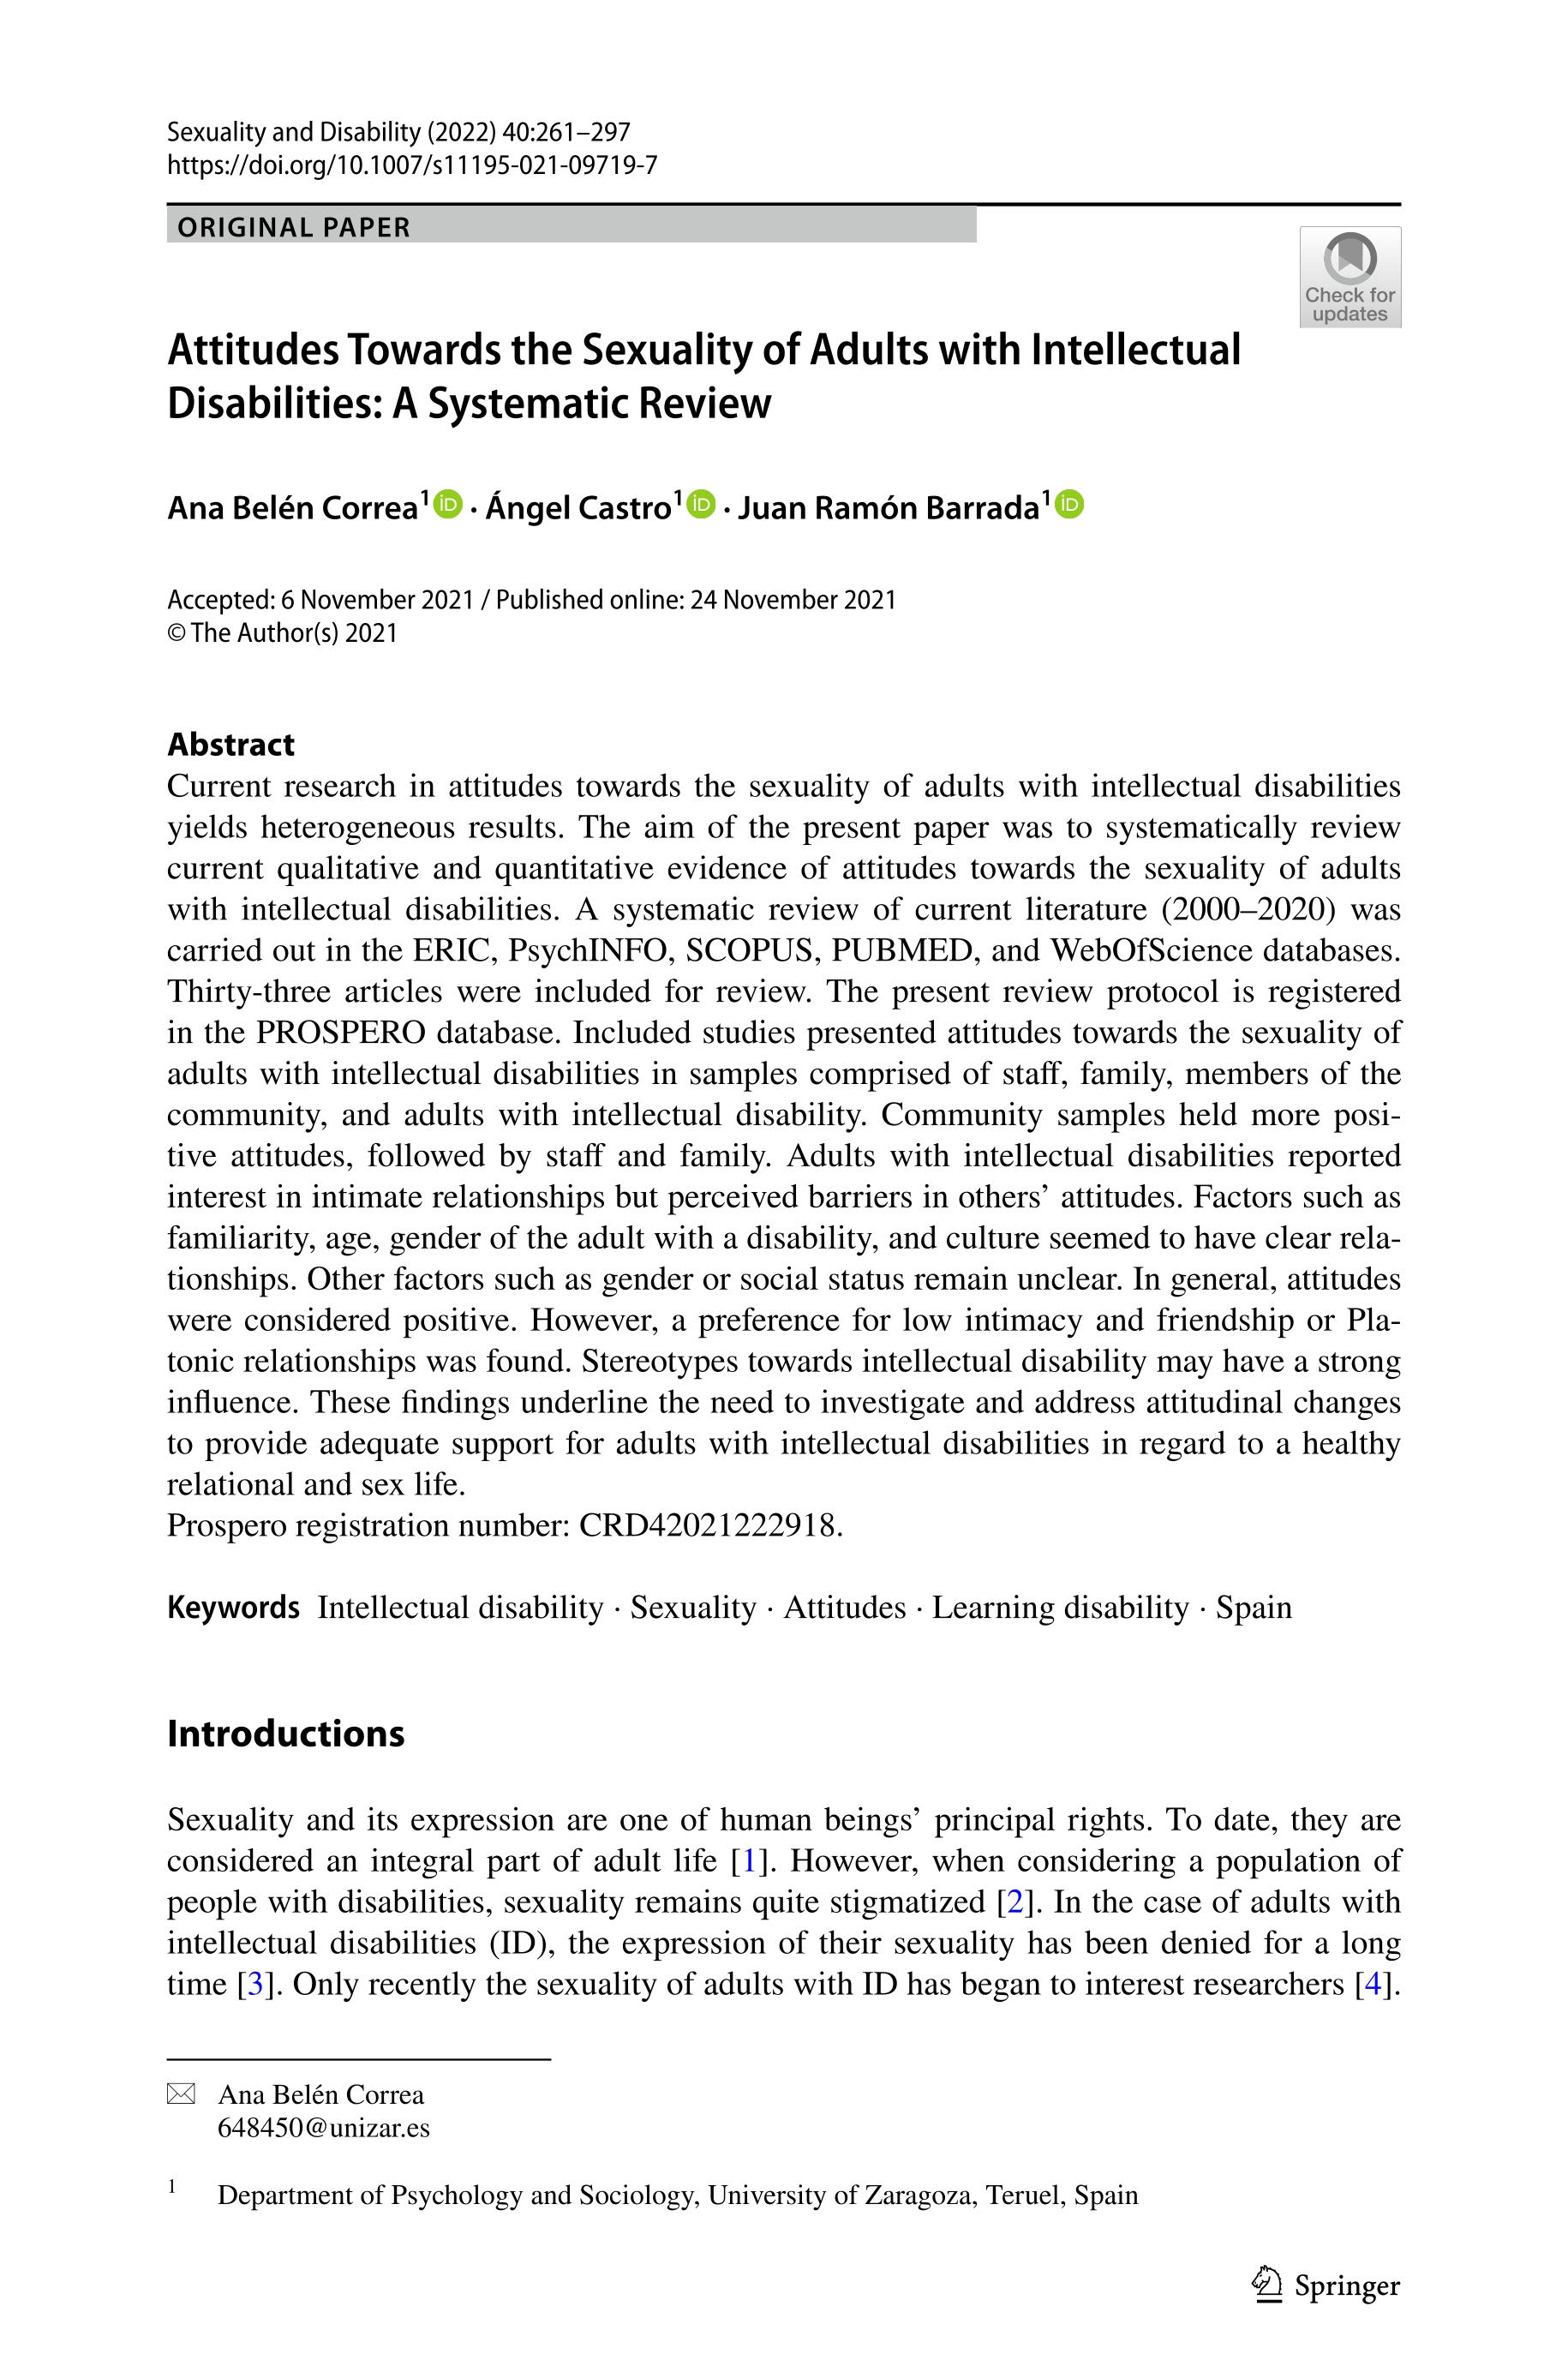 Attitudes towards the sexuality of adults with intellectual disabilities: a systematic review